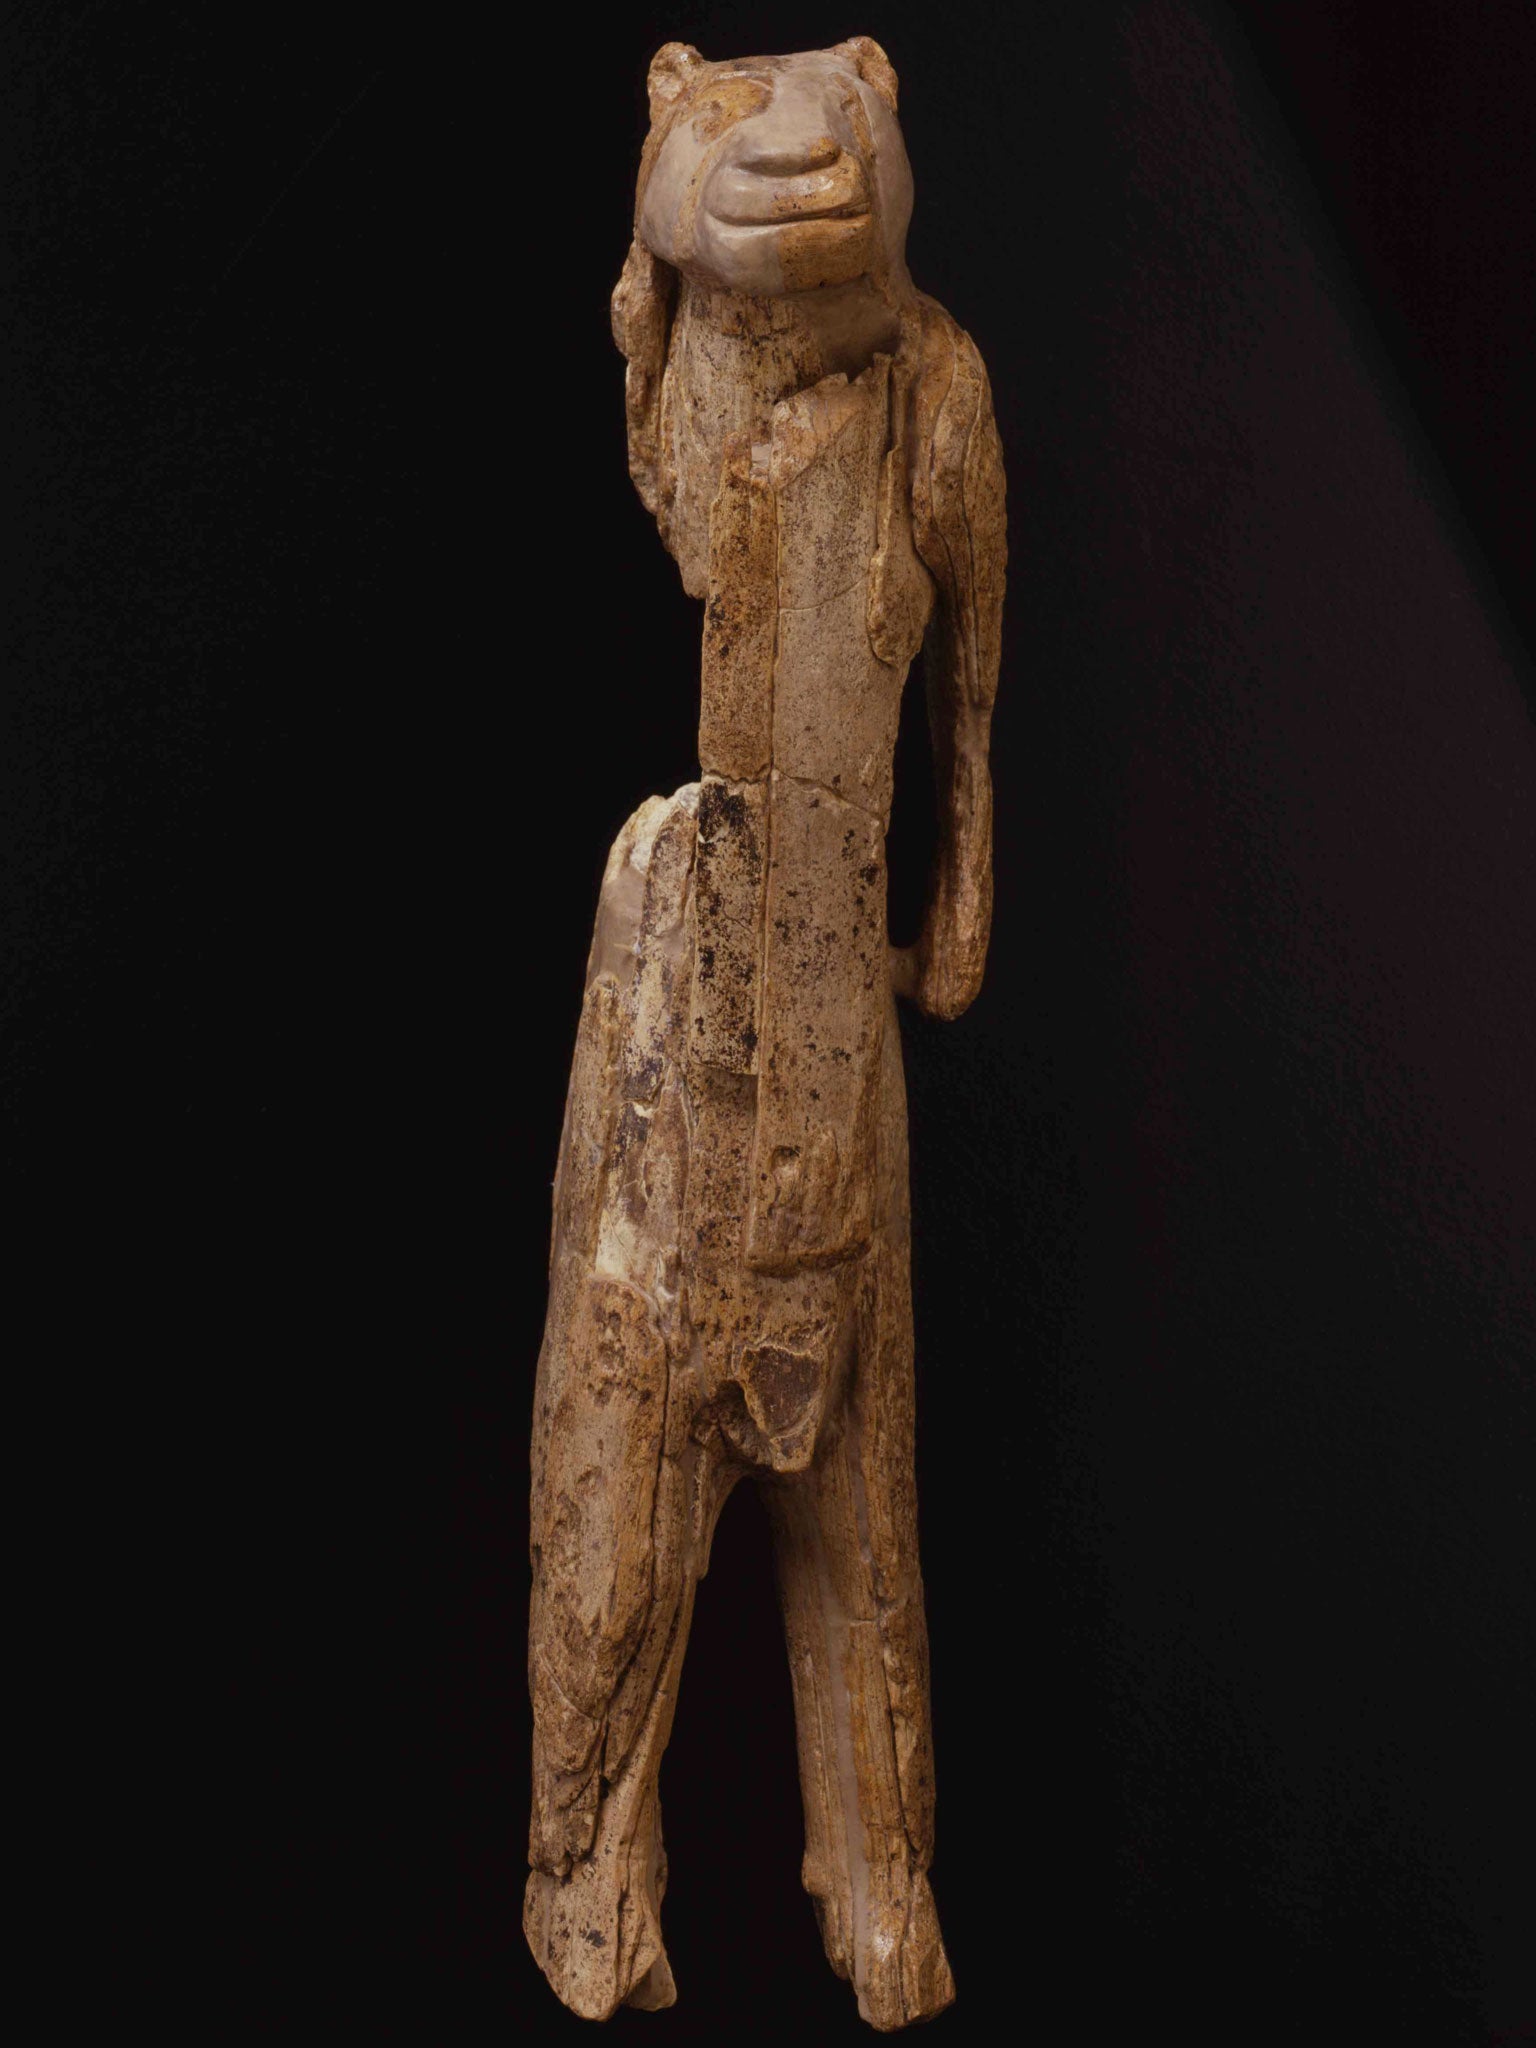 A resin replica of the Lion Man